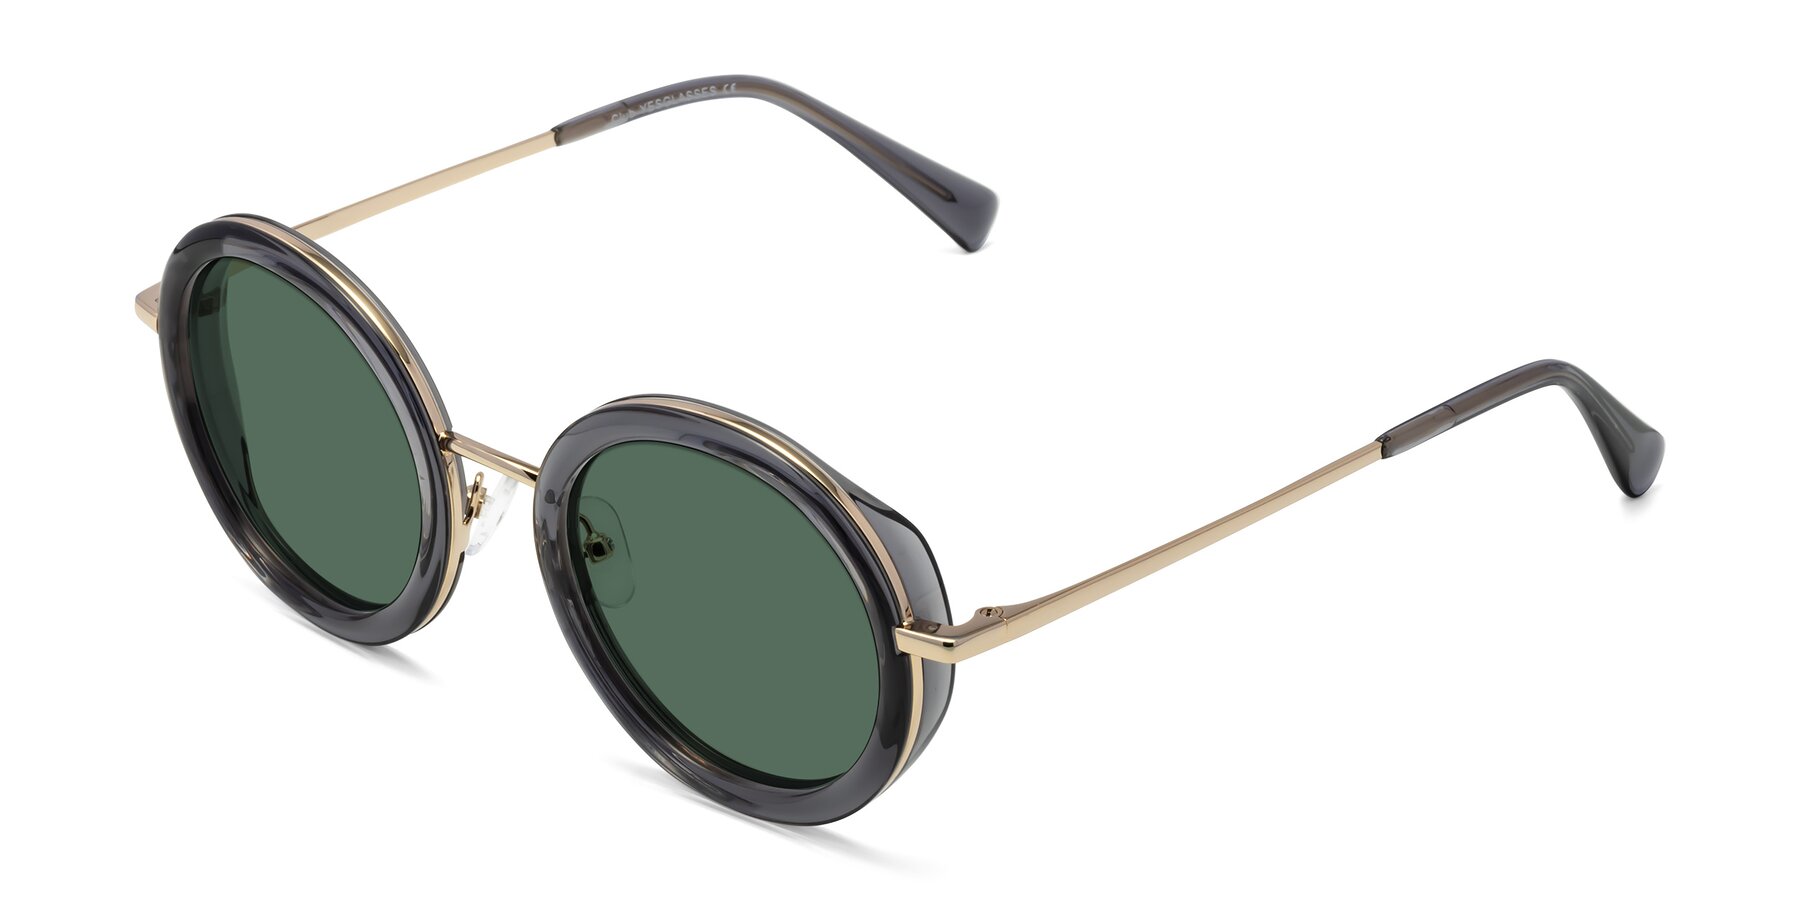 Angle of Club in Gray-Gold with Green Polarized Lenses